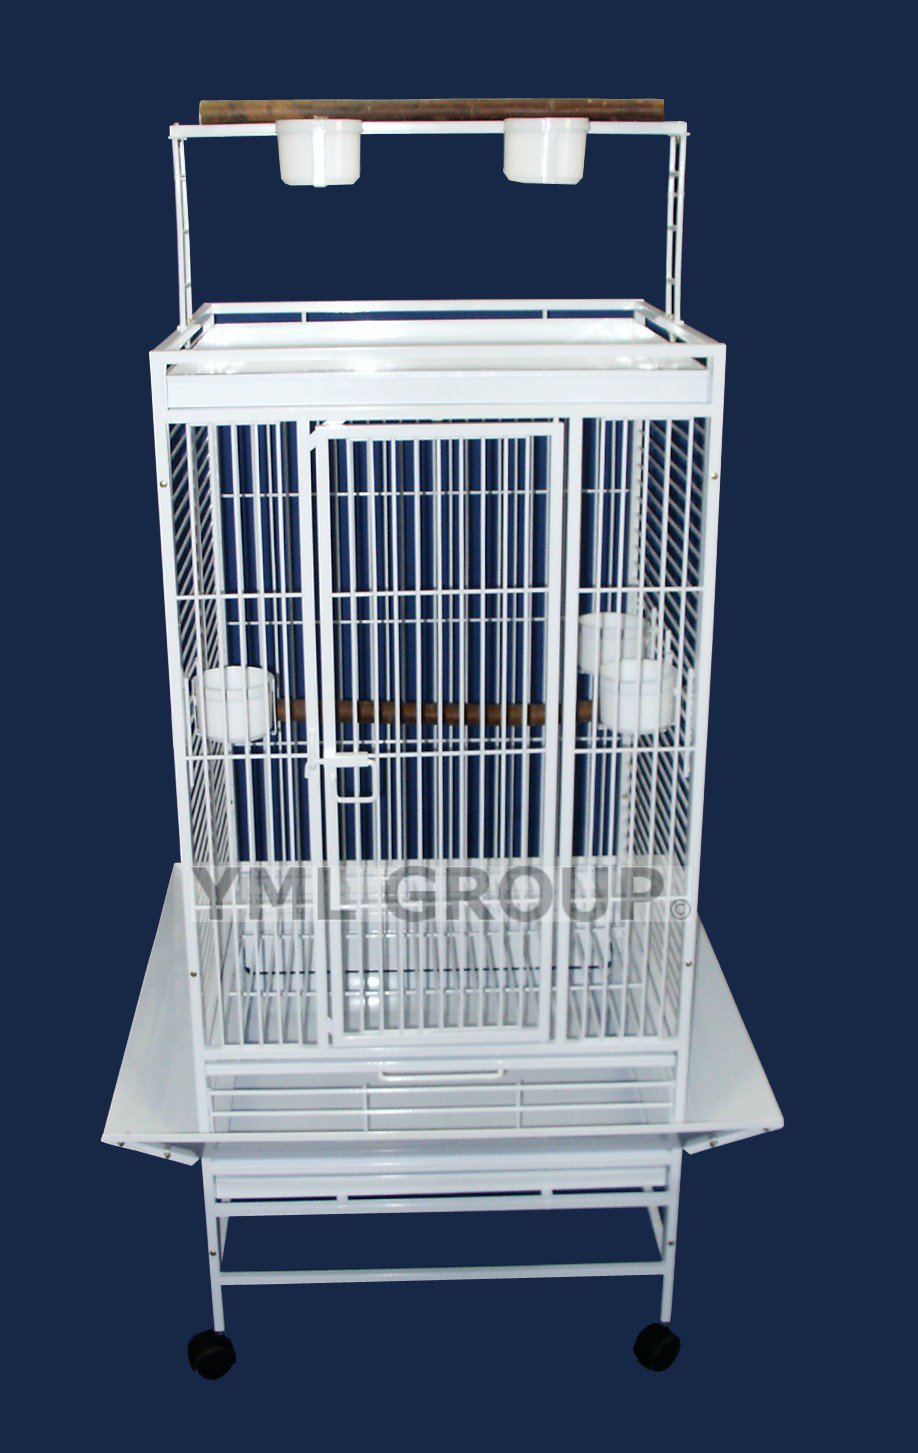 Yml Group Wi24wht Wi24 3/4" Bar Spacing Play Top Wrought Iron Parrot Cage - 24"x22" In White